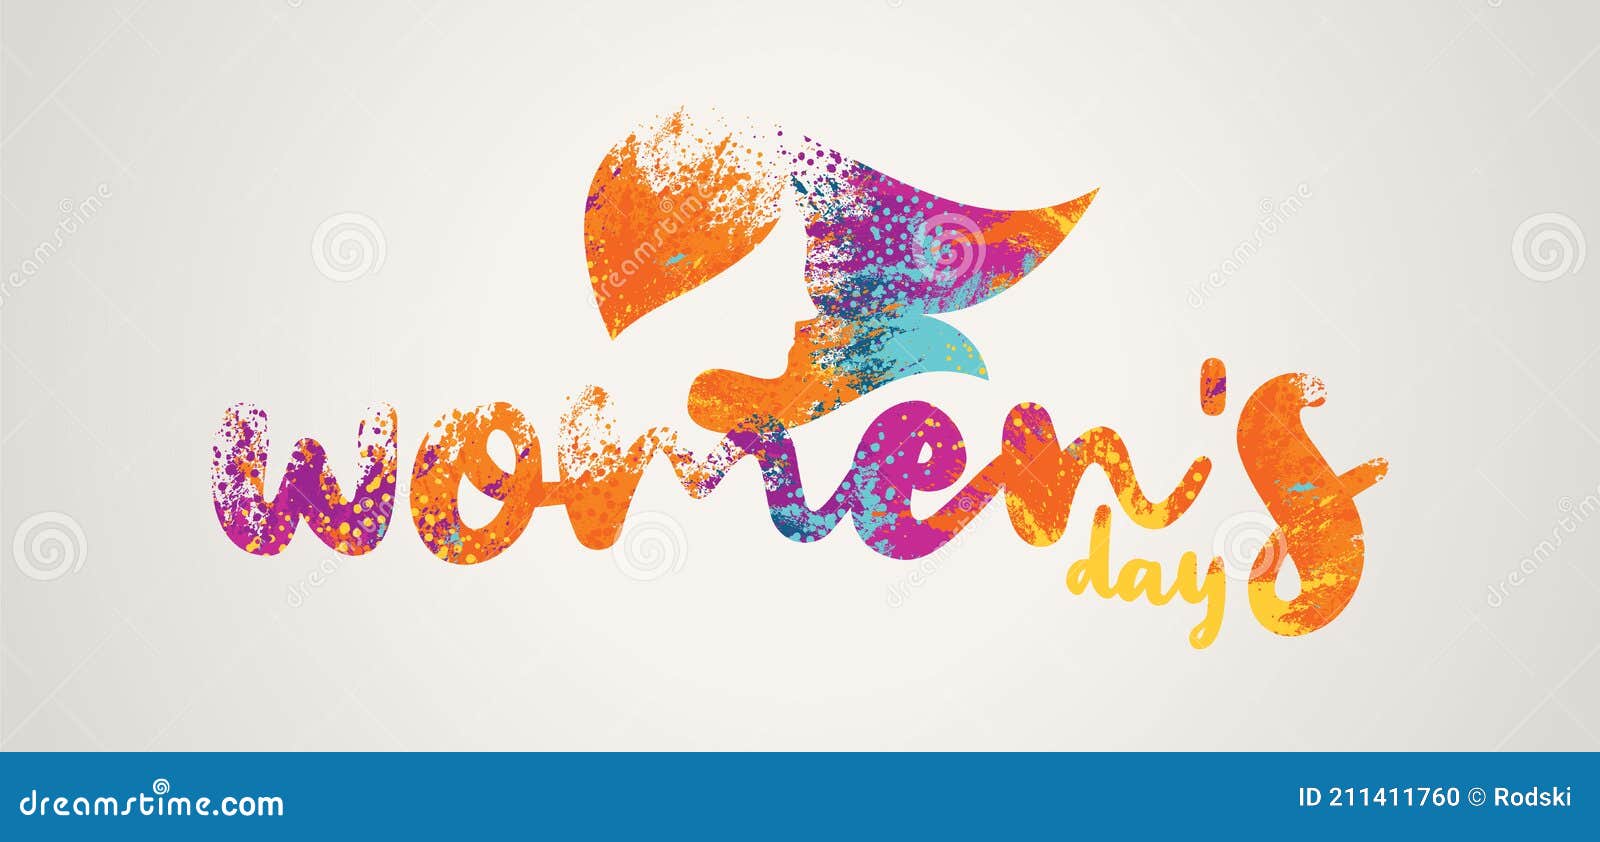 women`s day logo  with silhouette of a woman`s head.